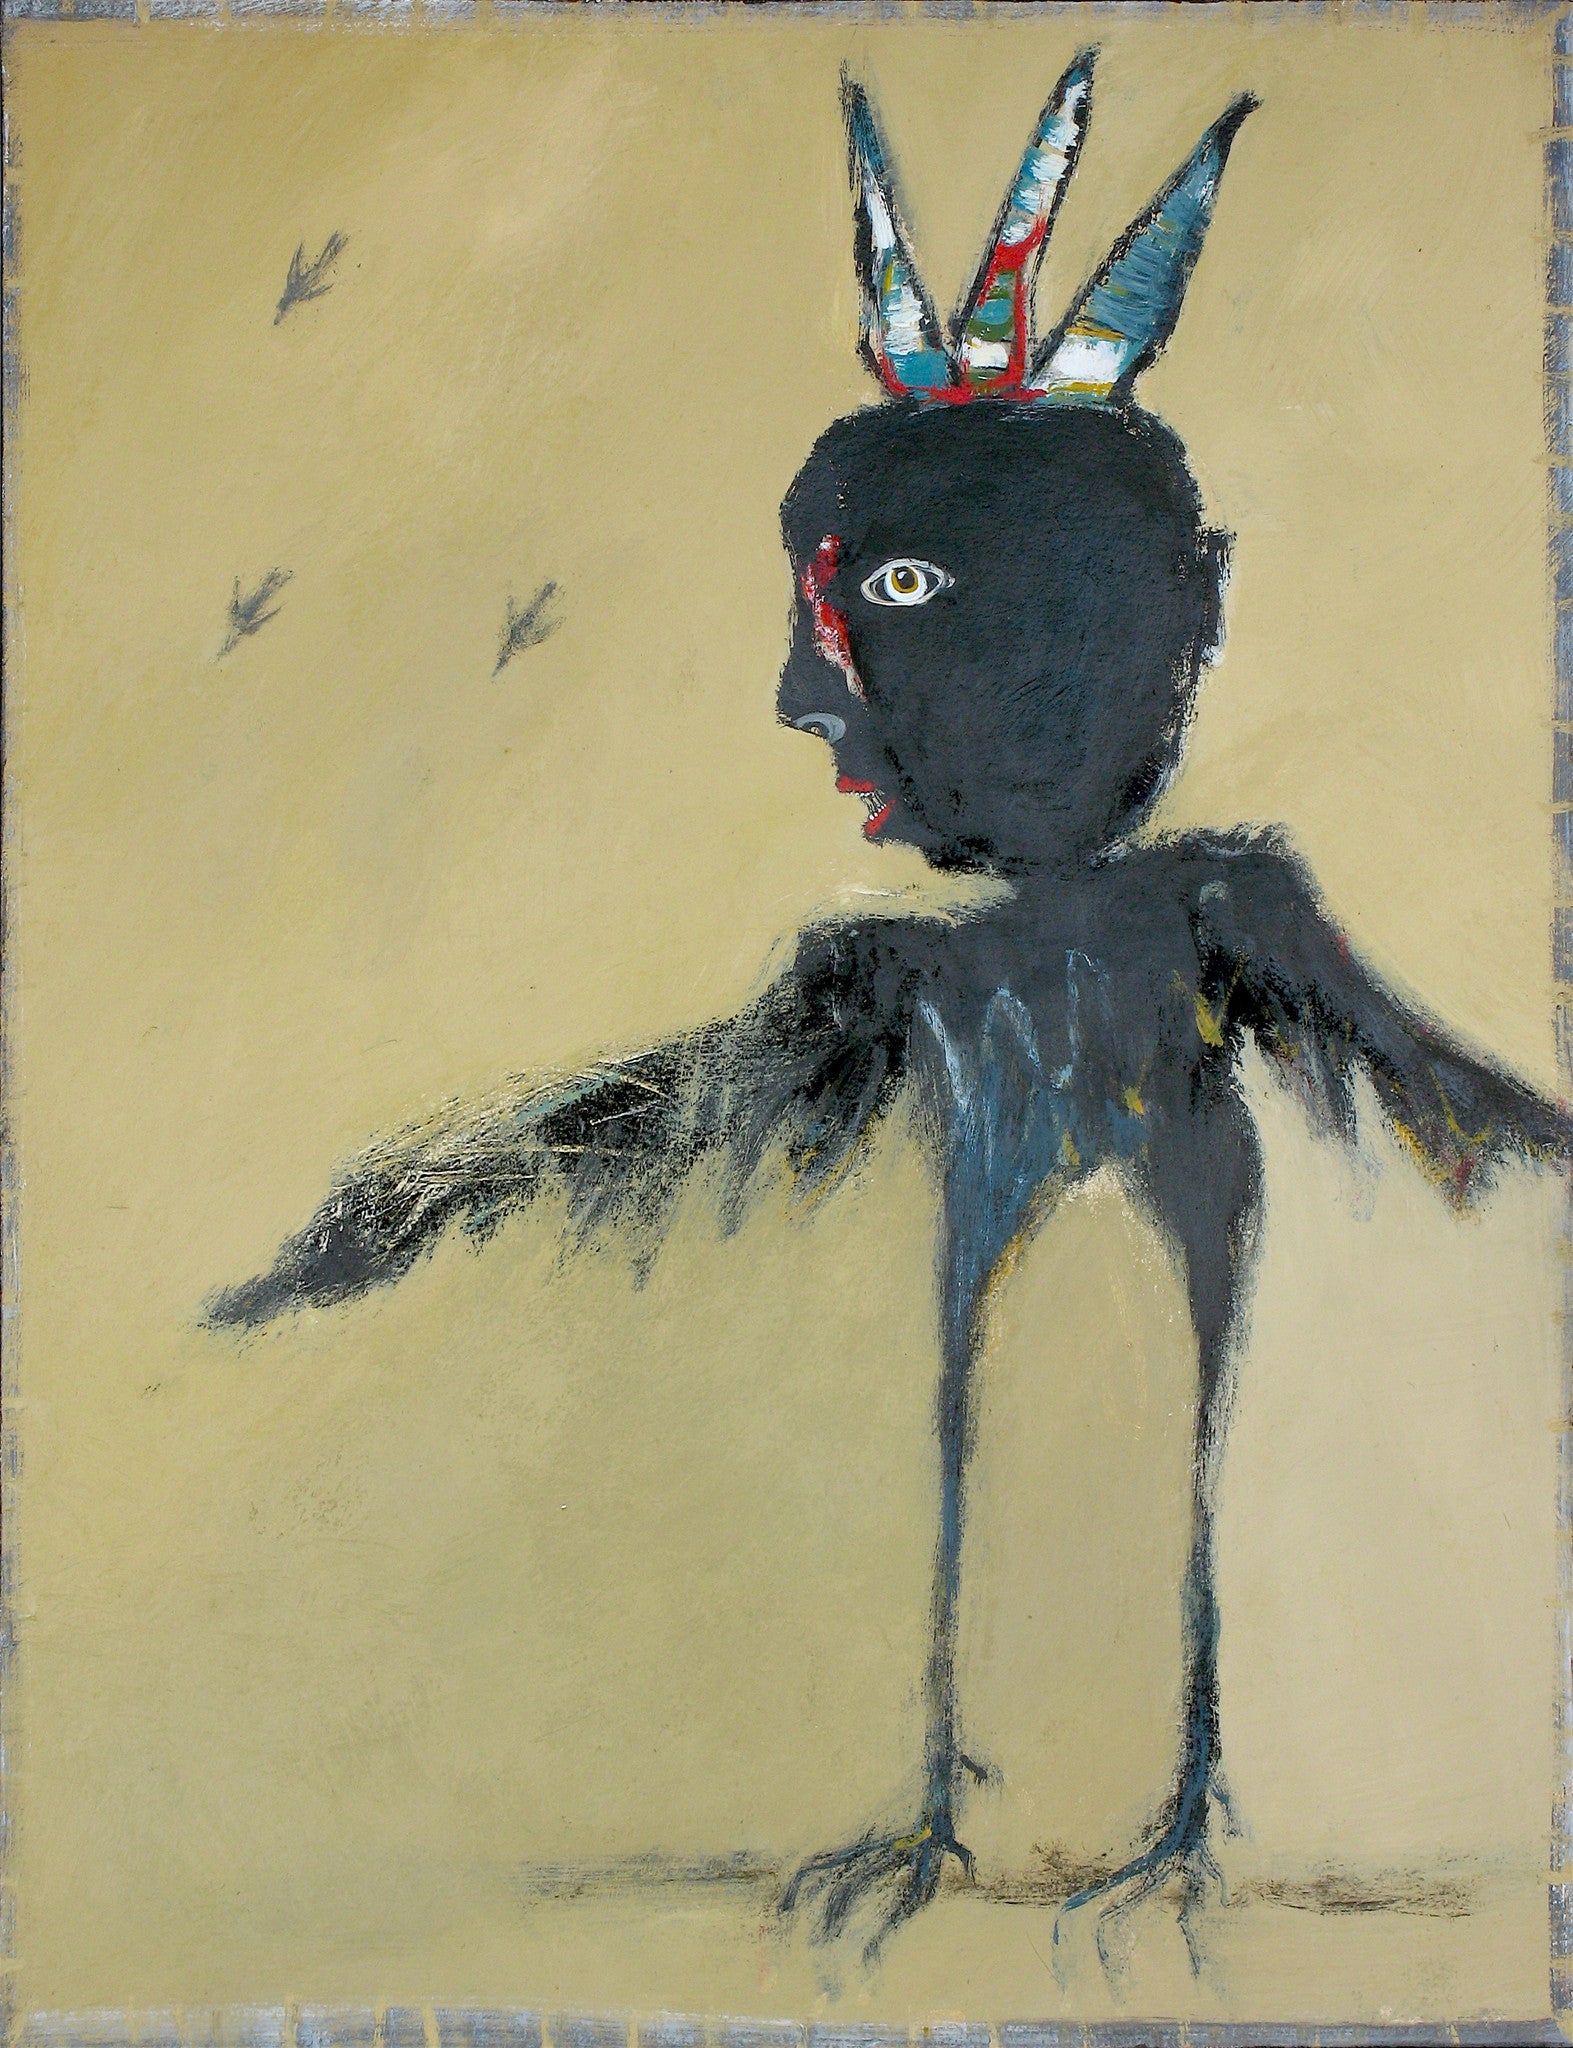 SOLD   "The Raven King Flaunts His Stolen Feathers"